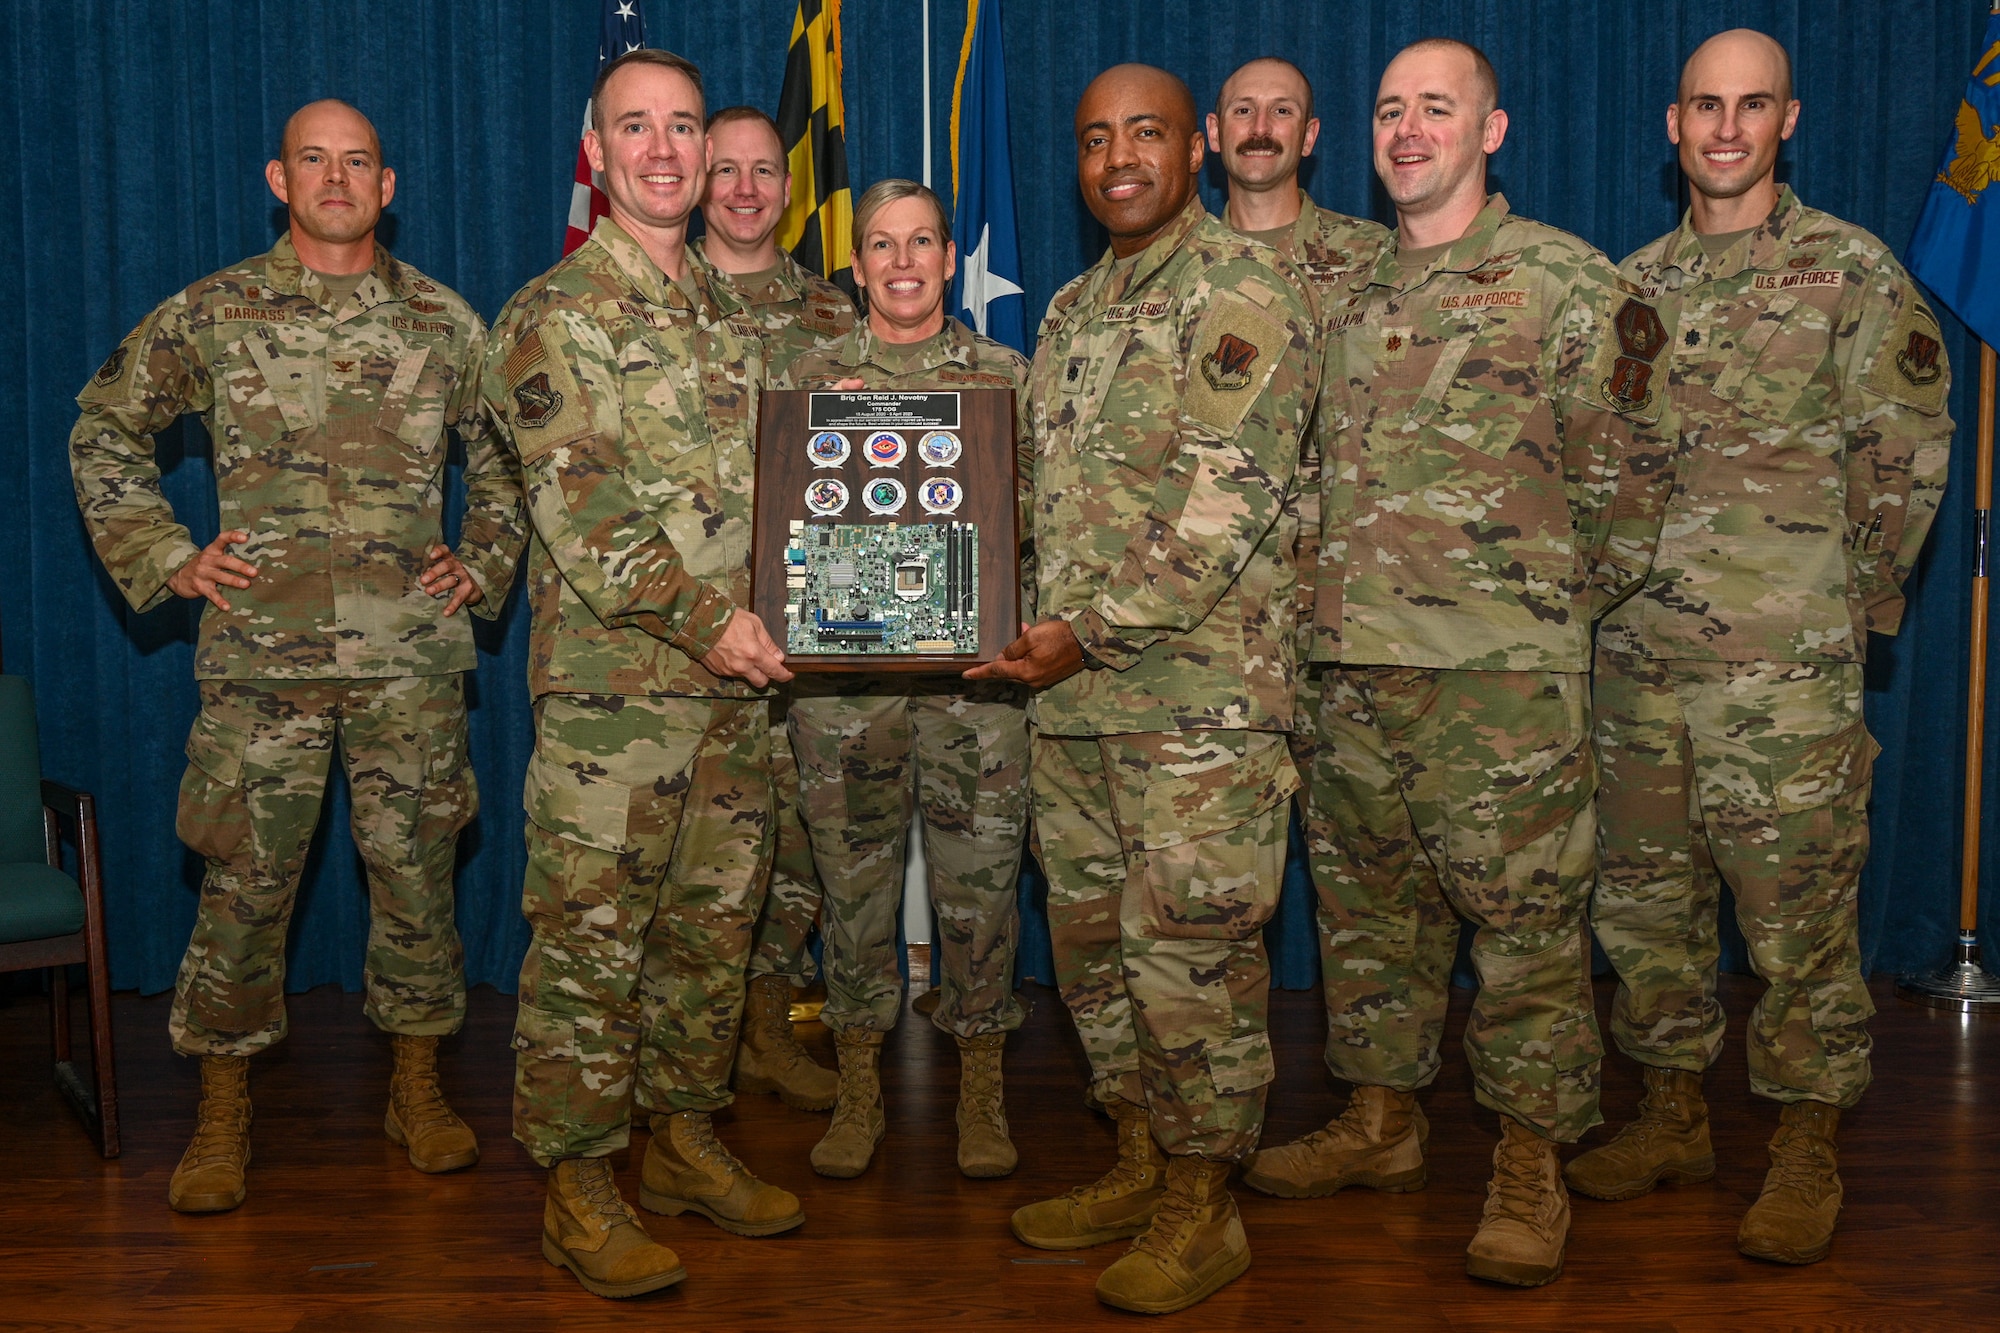 U.S. Air Force Brig. Gen. Reid Novotny, center left, 175th Cyberspace Operations Group outgoing commander, is presented with a plaque of appreciation from the 175th Cyberspace Operations Group leadership to commemorate his time as commander, August 12, 2023, at Martin State Air National Guard Base, Maryland.